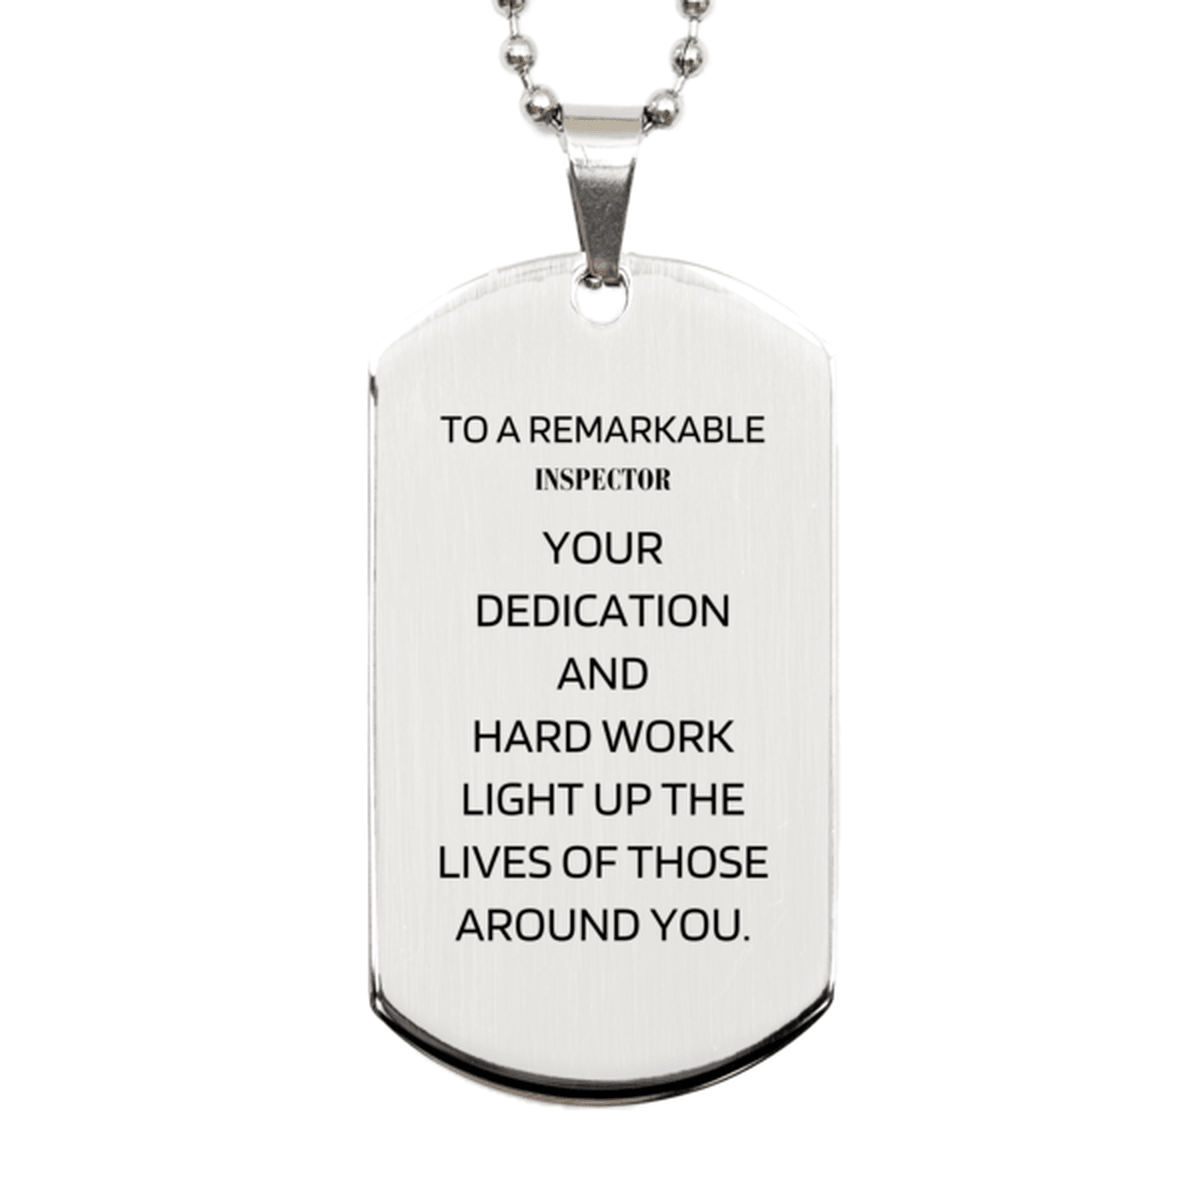 Remarkable Inspector Gifts, Your dedication and hard work, Inspirational Birthday Christmas Unique Silver Dog Tag For Inspector, Coworkers, Men, Women, Friends - Mallard Moon Gift Shop